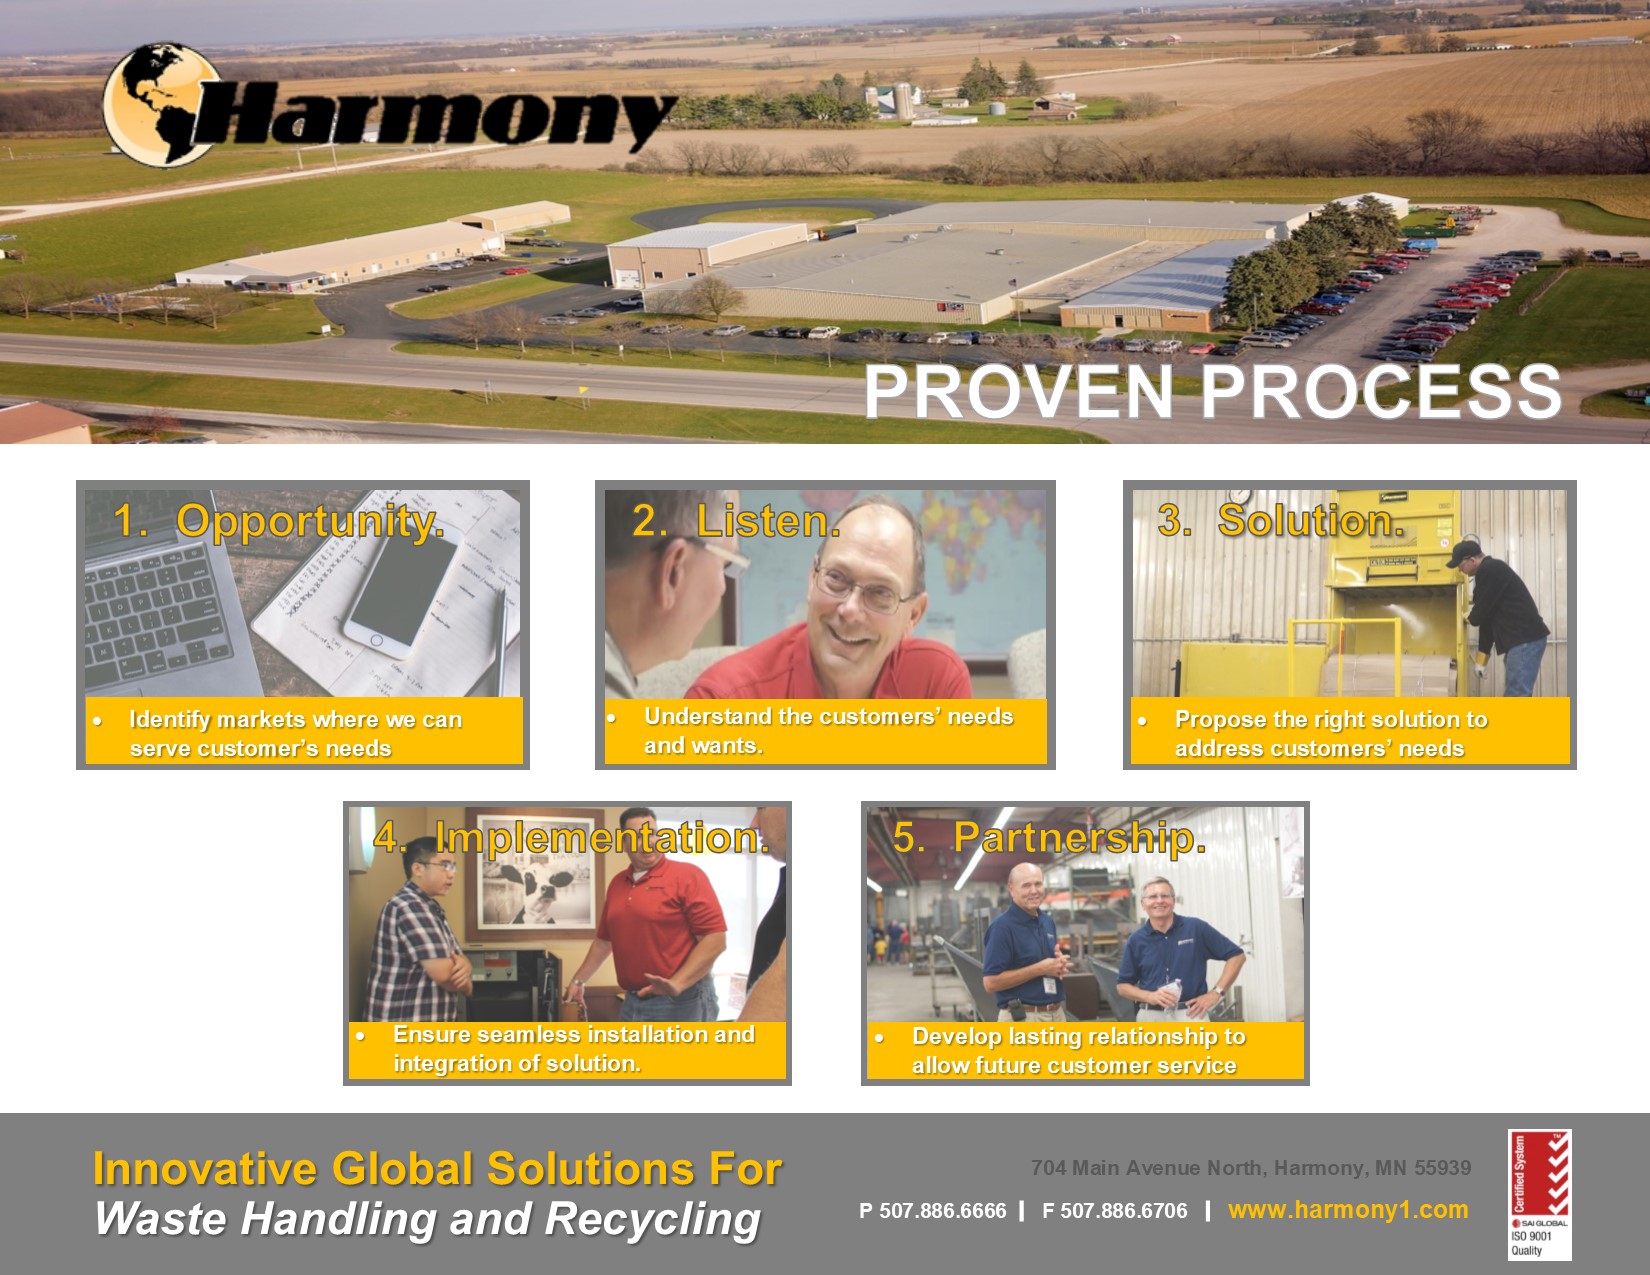 Harmony's Proven Process includes the important step of listening to understand the needs of the customer.